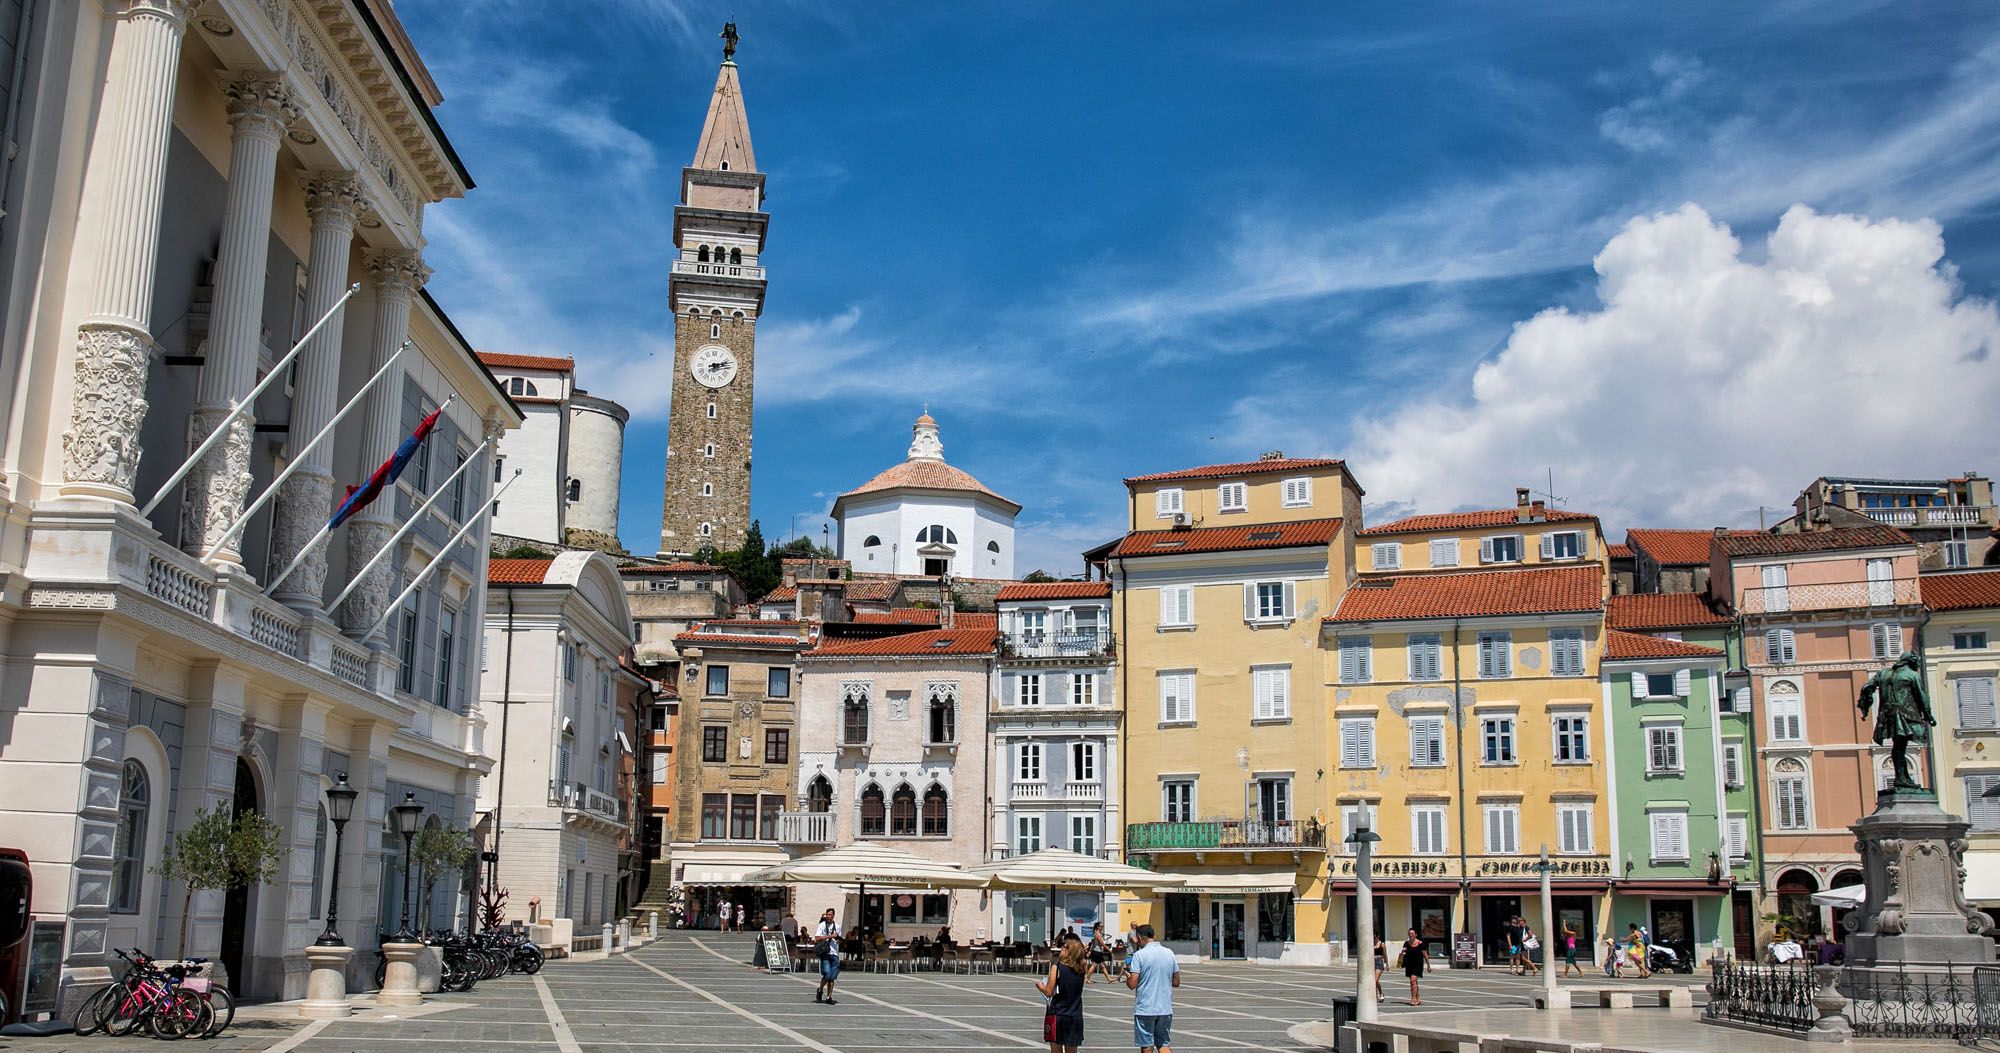 Featured image for “6 Great Things to Do in Piran, Slovenia”